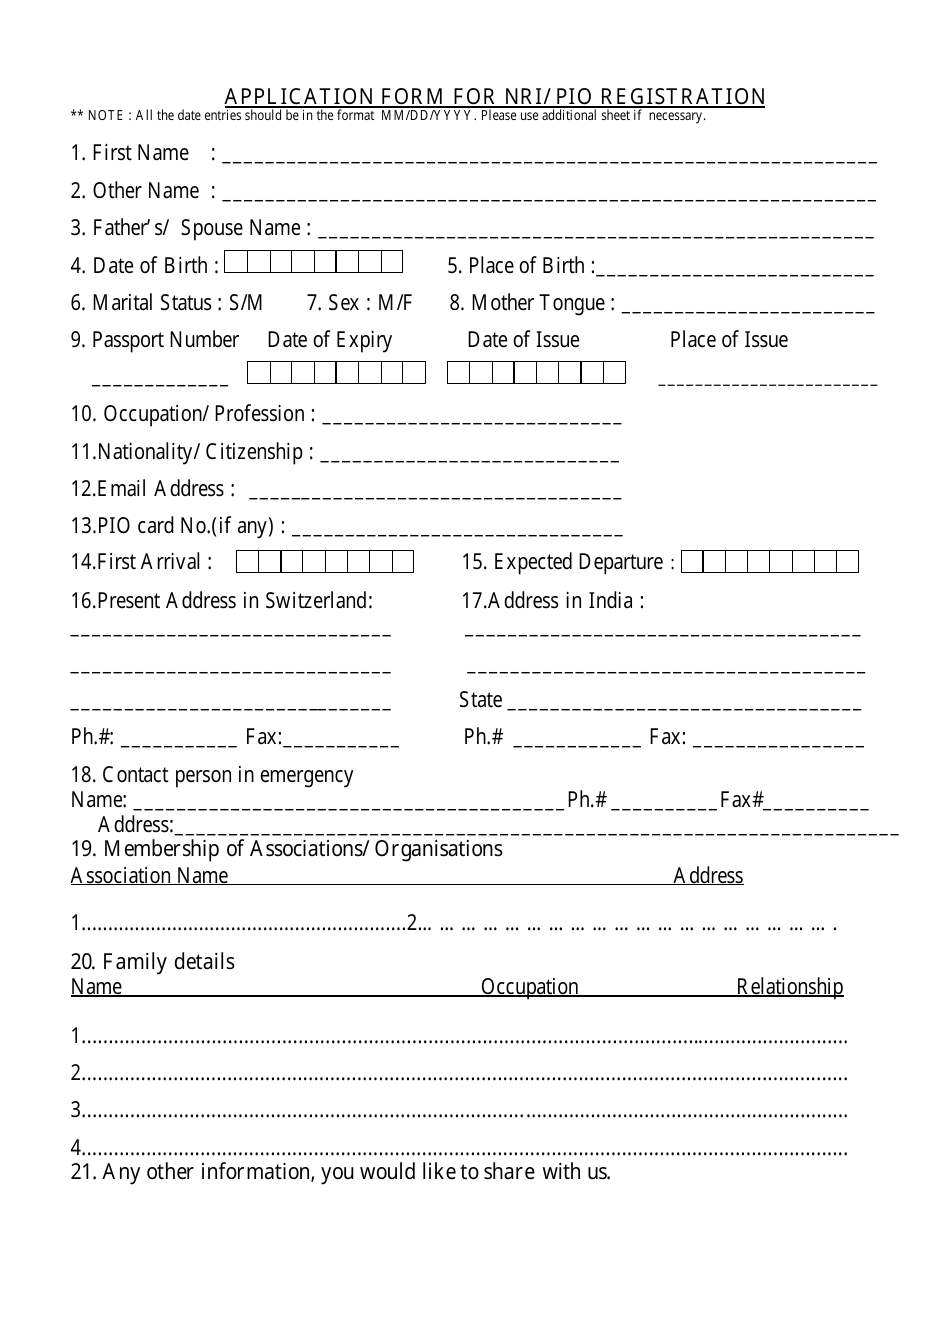 Application Form for Nri / Pio Registration - India, Page 1